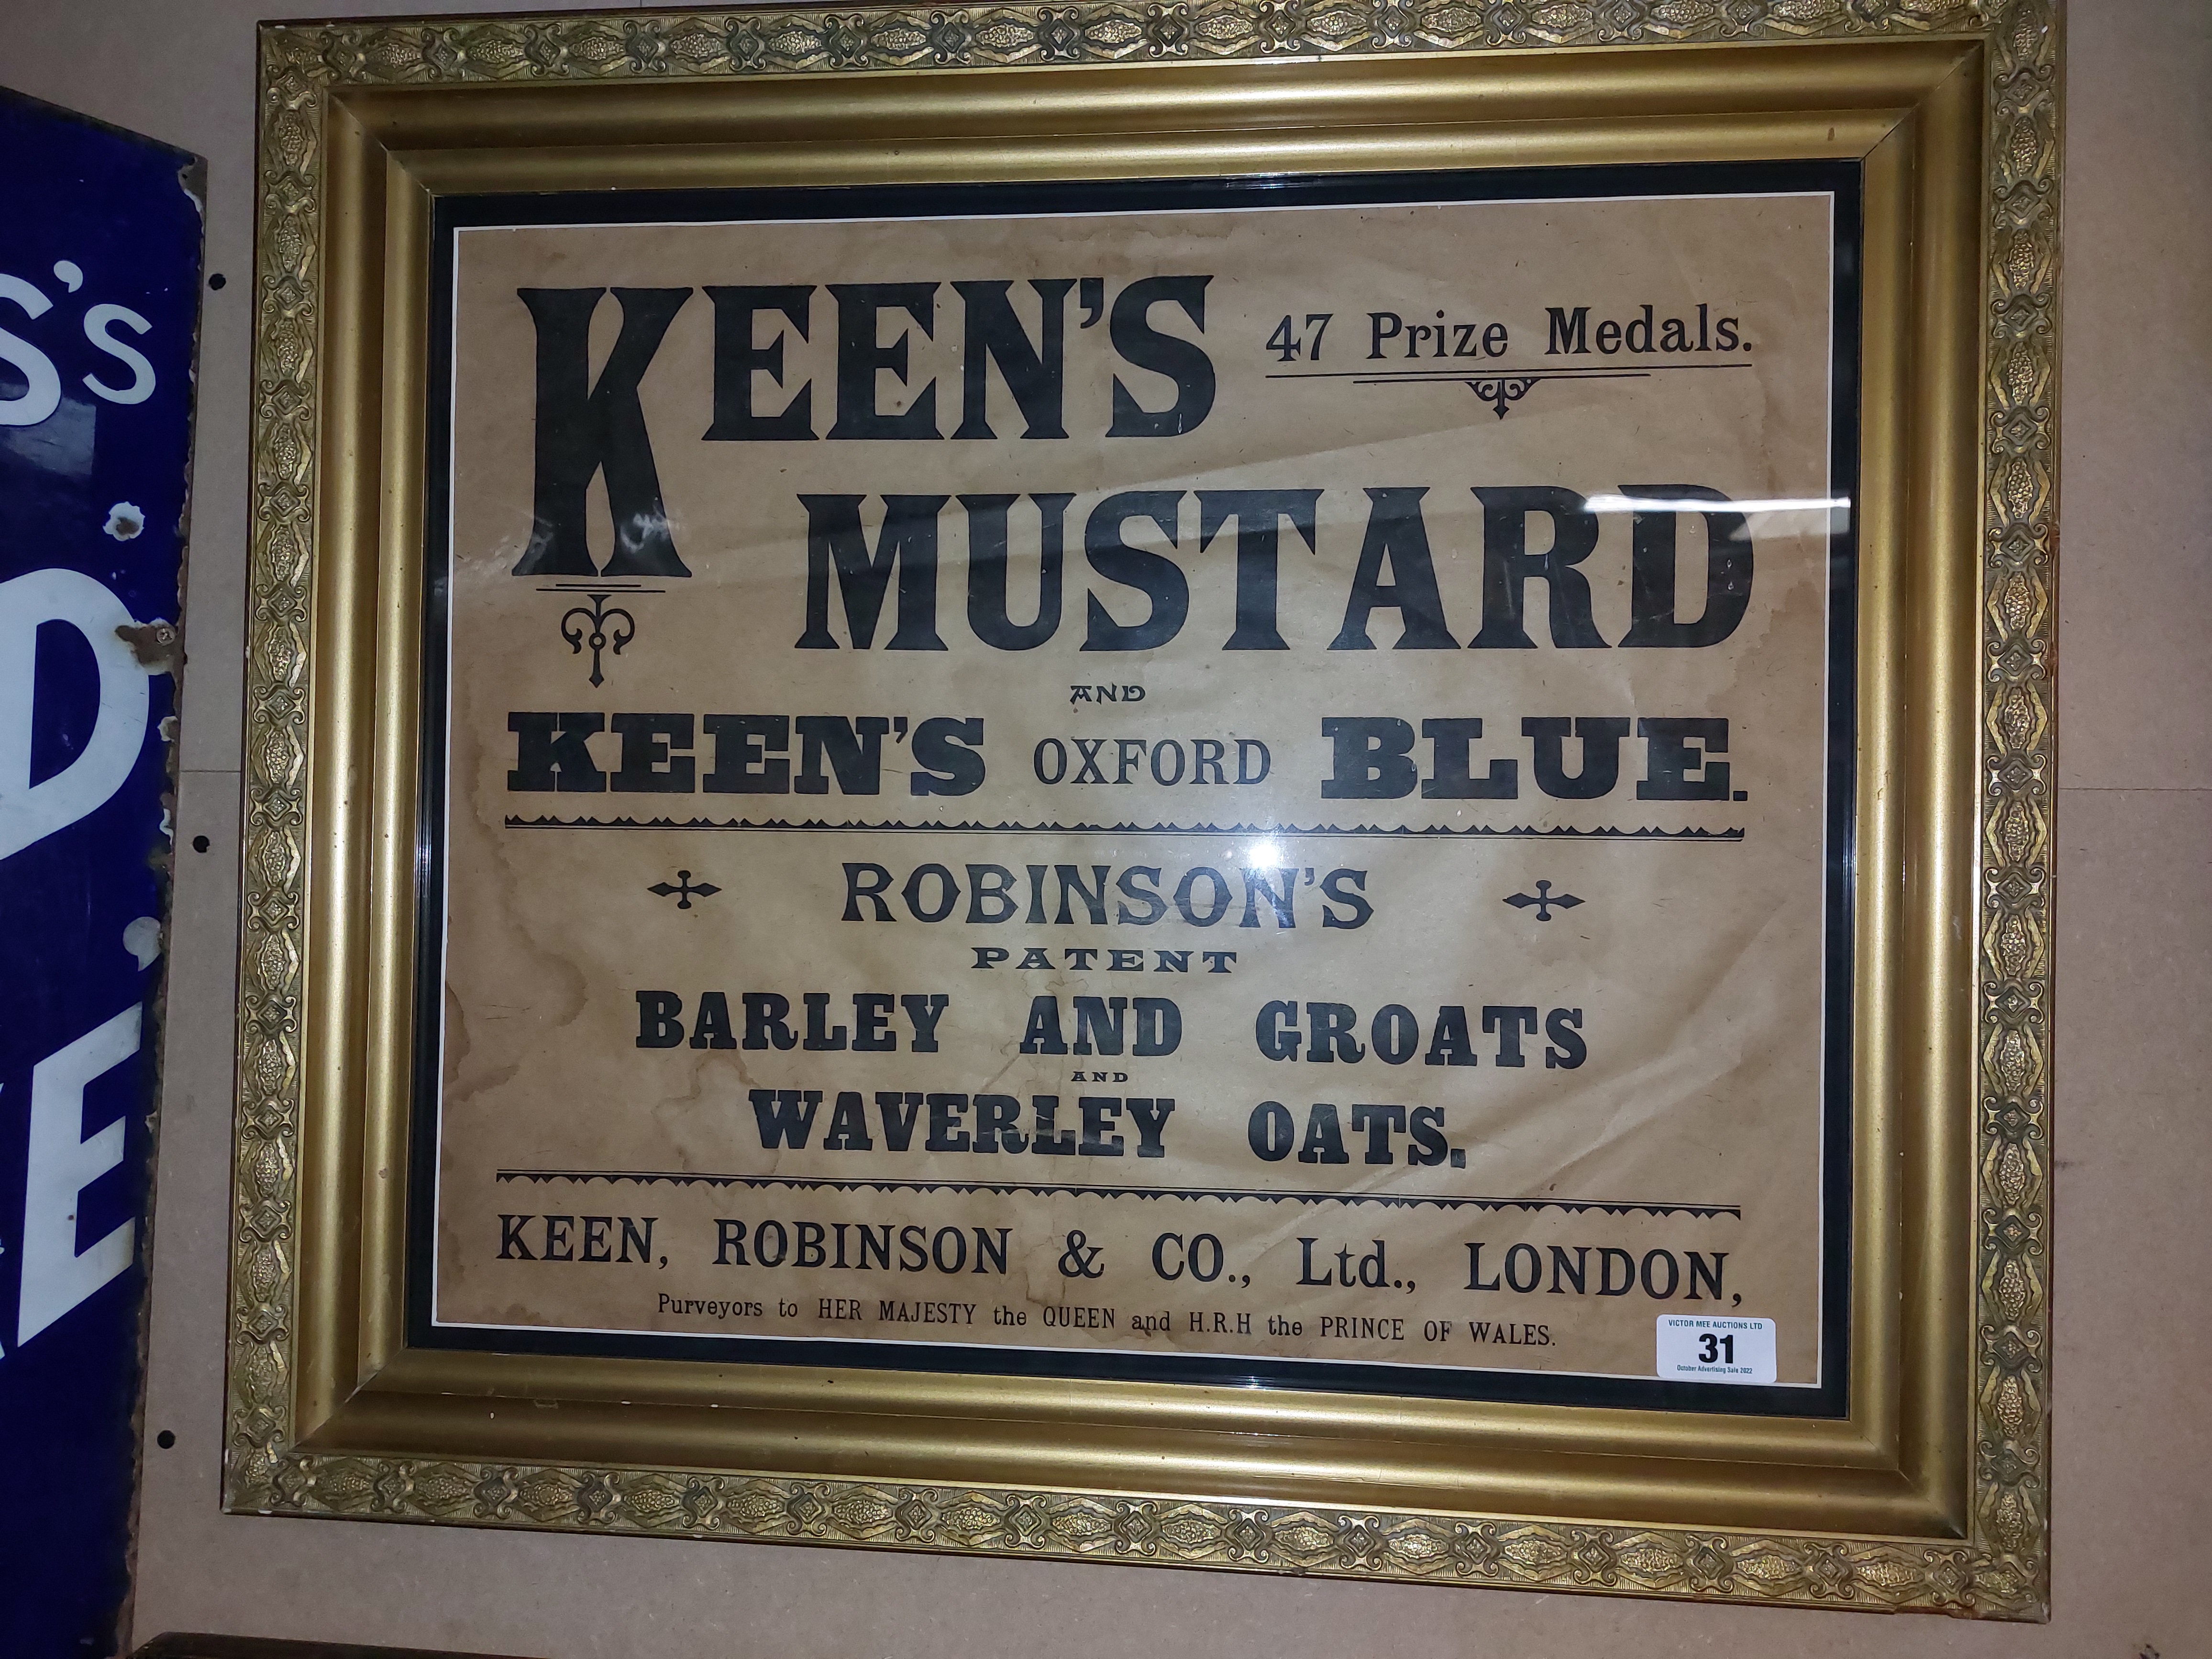 Keens Mustard Oxford Blue Providers to Her Majesty the Queen and The Prince of Wales framed